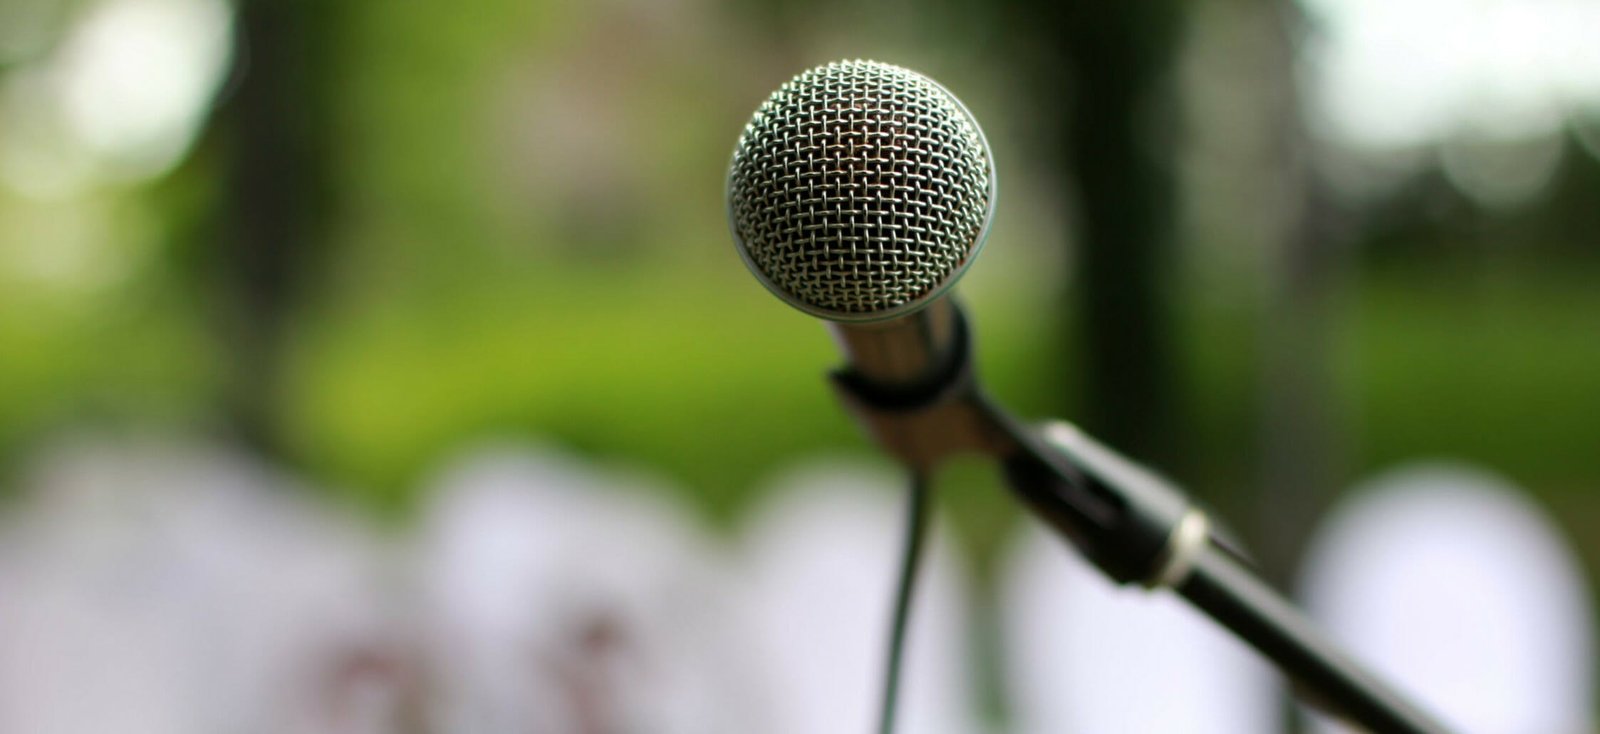 How to Overcome Your Fear of Public Speaking